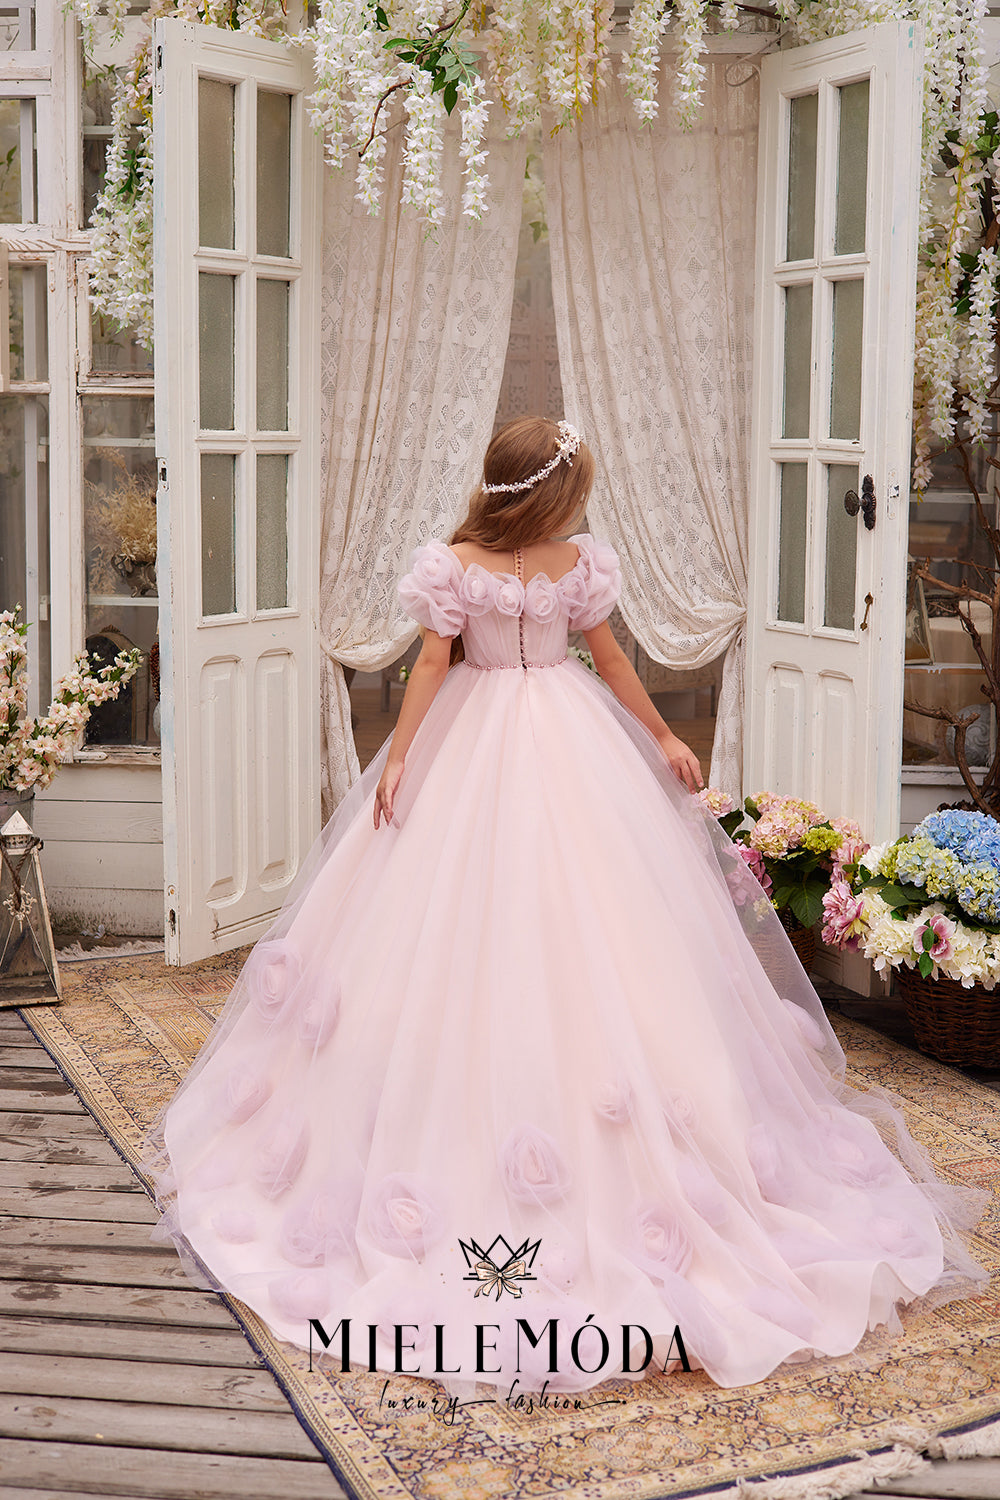 pretty flower girl wearing pink tulle dress with 3d flowers standing in front of open doors showing the back of the gown and headpiece